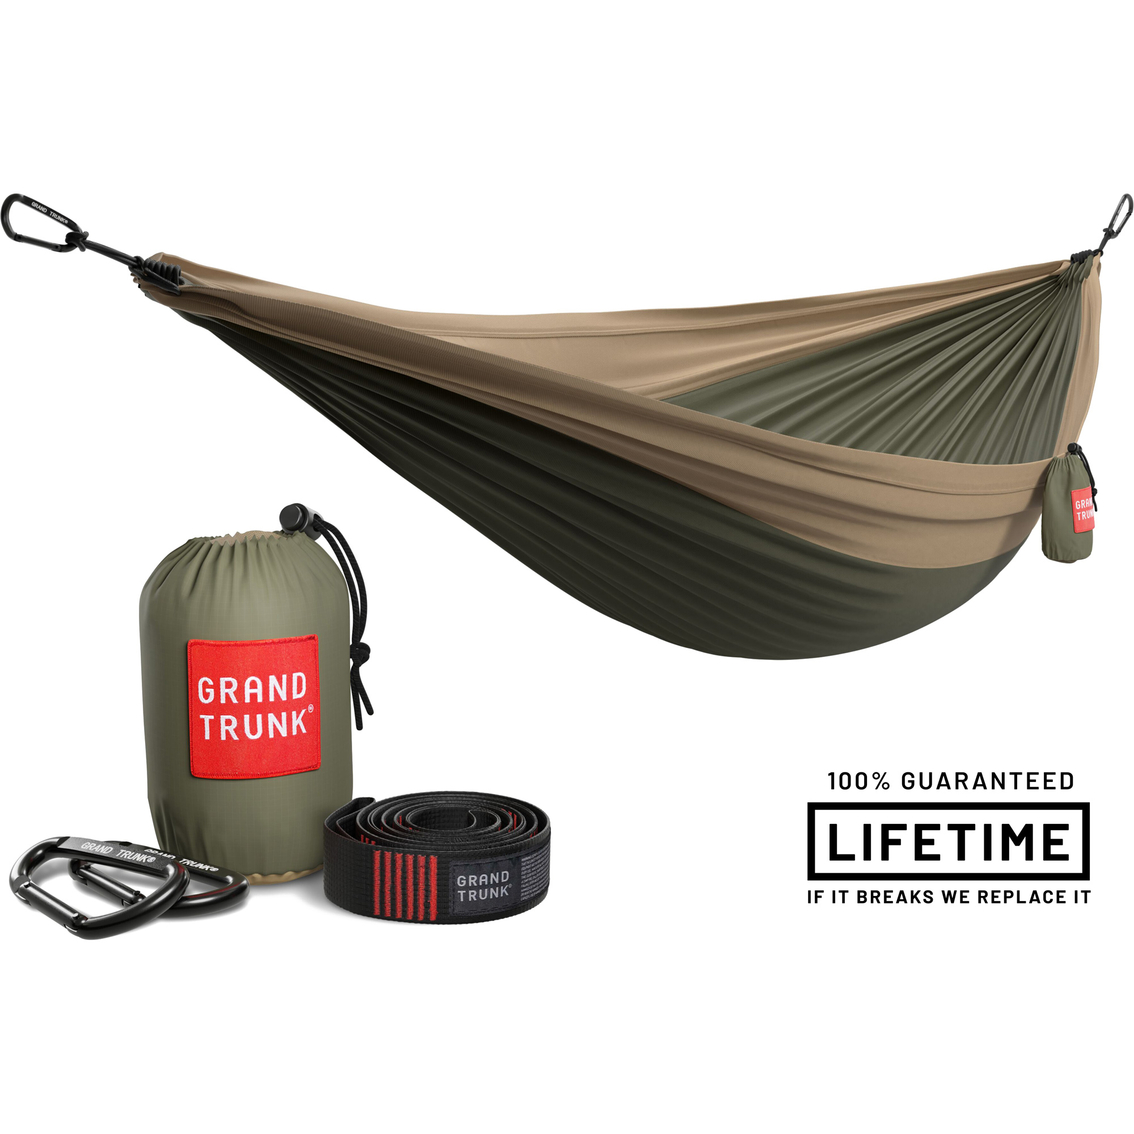 Grand Trunk Double Parachute Nylon Hammock with Straps - Image 6 of 8